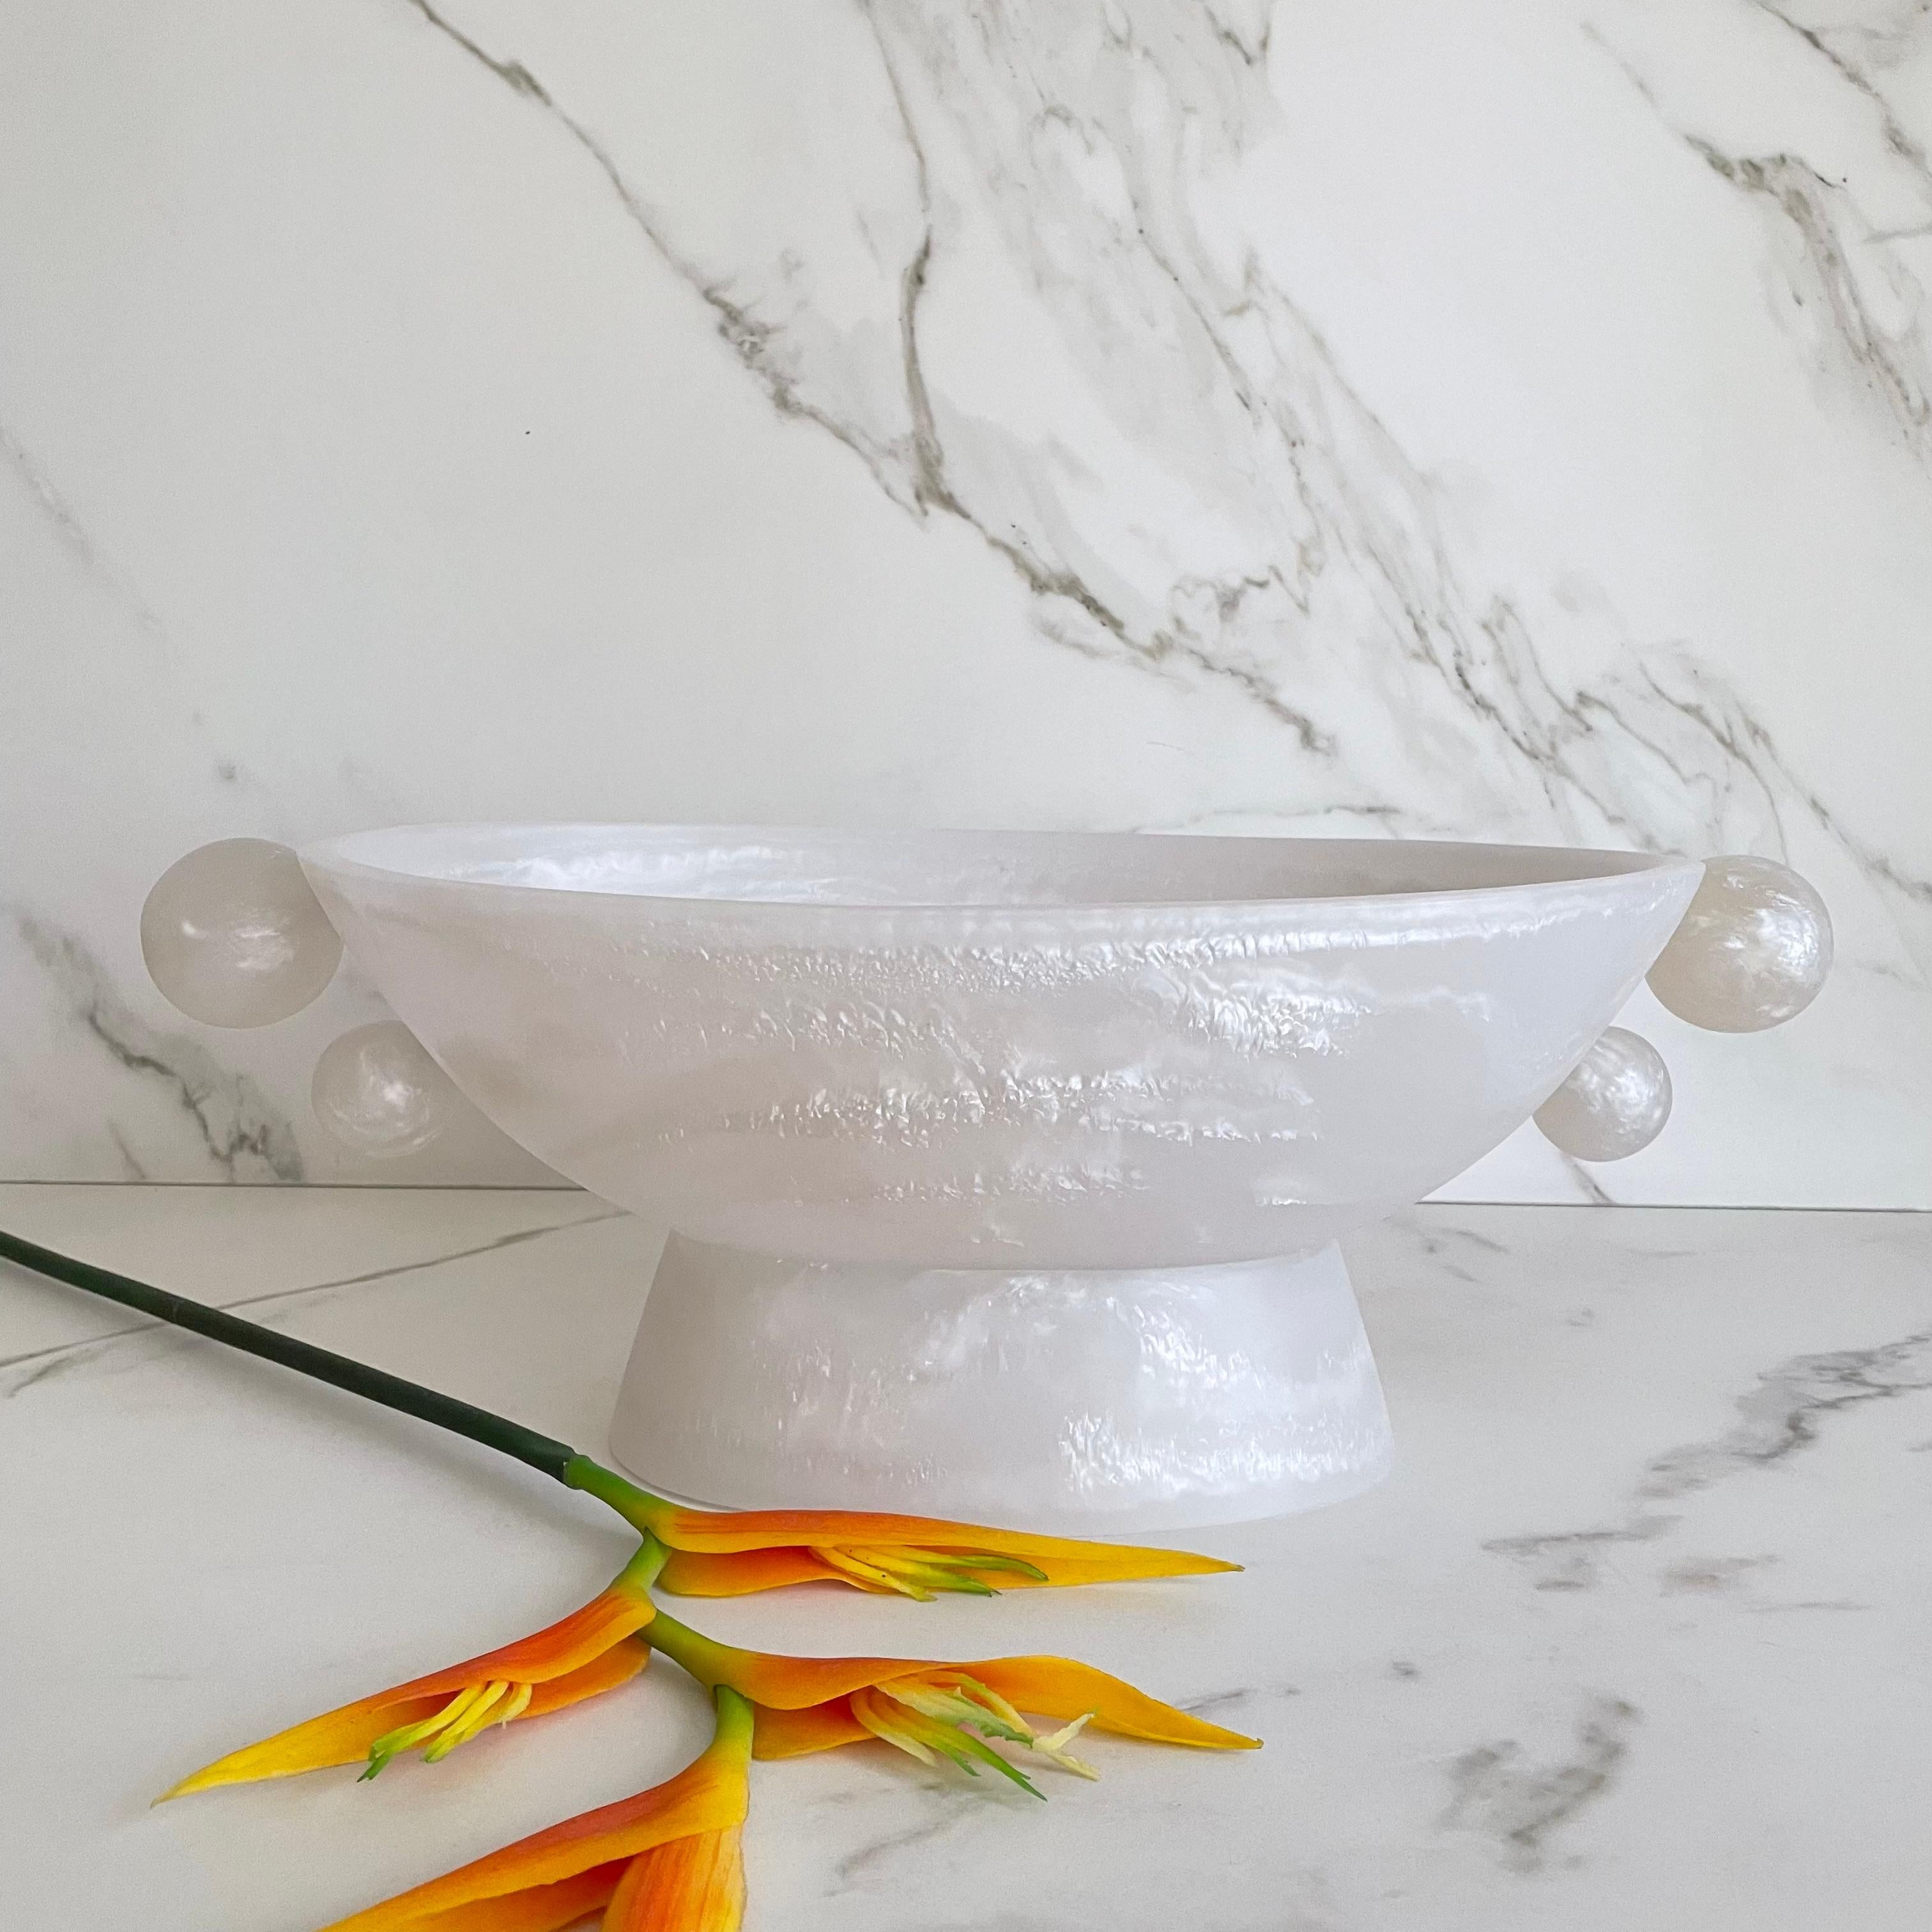 Our oval pedestal bowl is great for holding fruit, plants, decorative objects, faux succulents and specially everyone's attention. You can have it on display on a kitchen counter or use it as a centerpiece on a dining table, the possibilities are